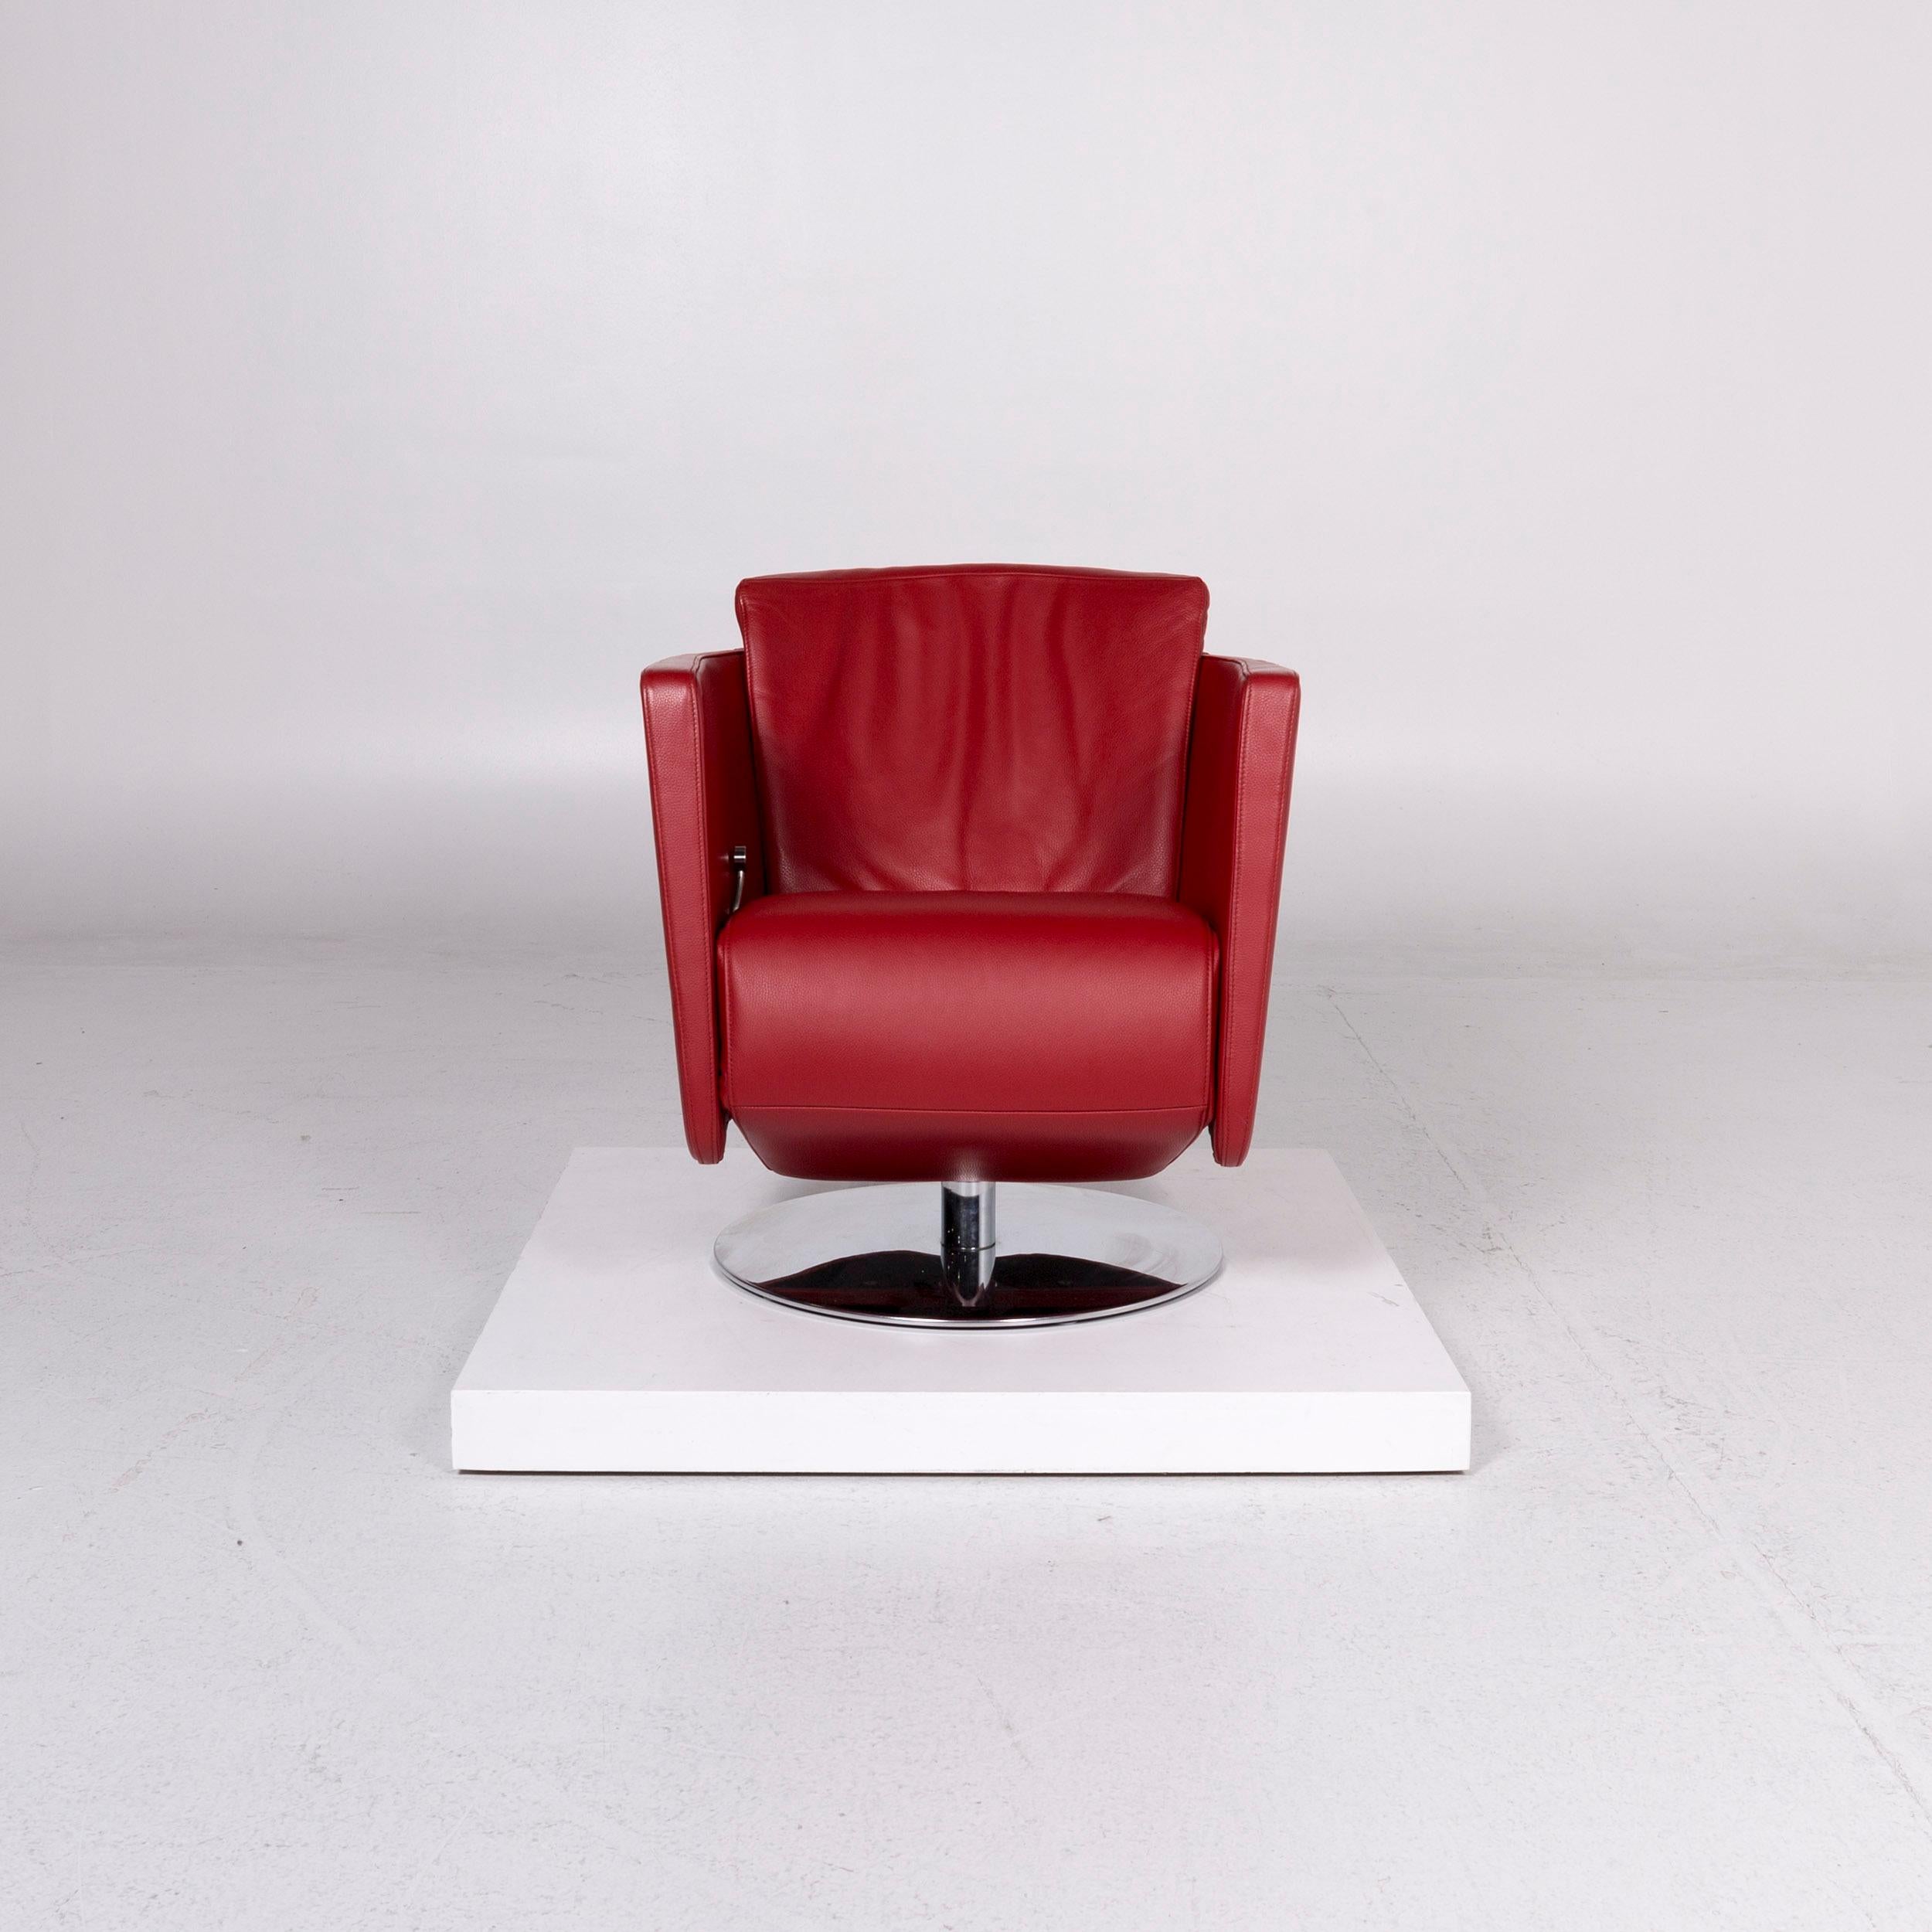 We bring to you a FSM Just leather armchair red relaxation function.

 Product measurements in centimeters:
 
Depth 83
Width 68
Height 77
Seat-height 45
Rest-height 68
Seat-depth 47
Seat-width 52
Back-height 37.
 